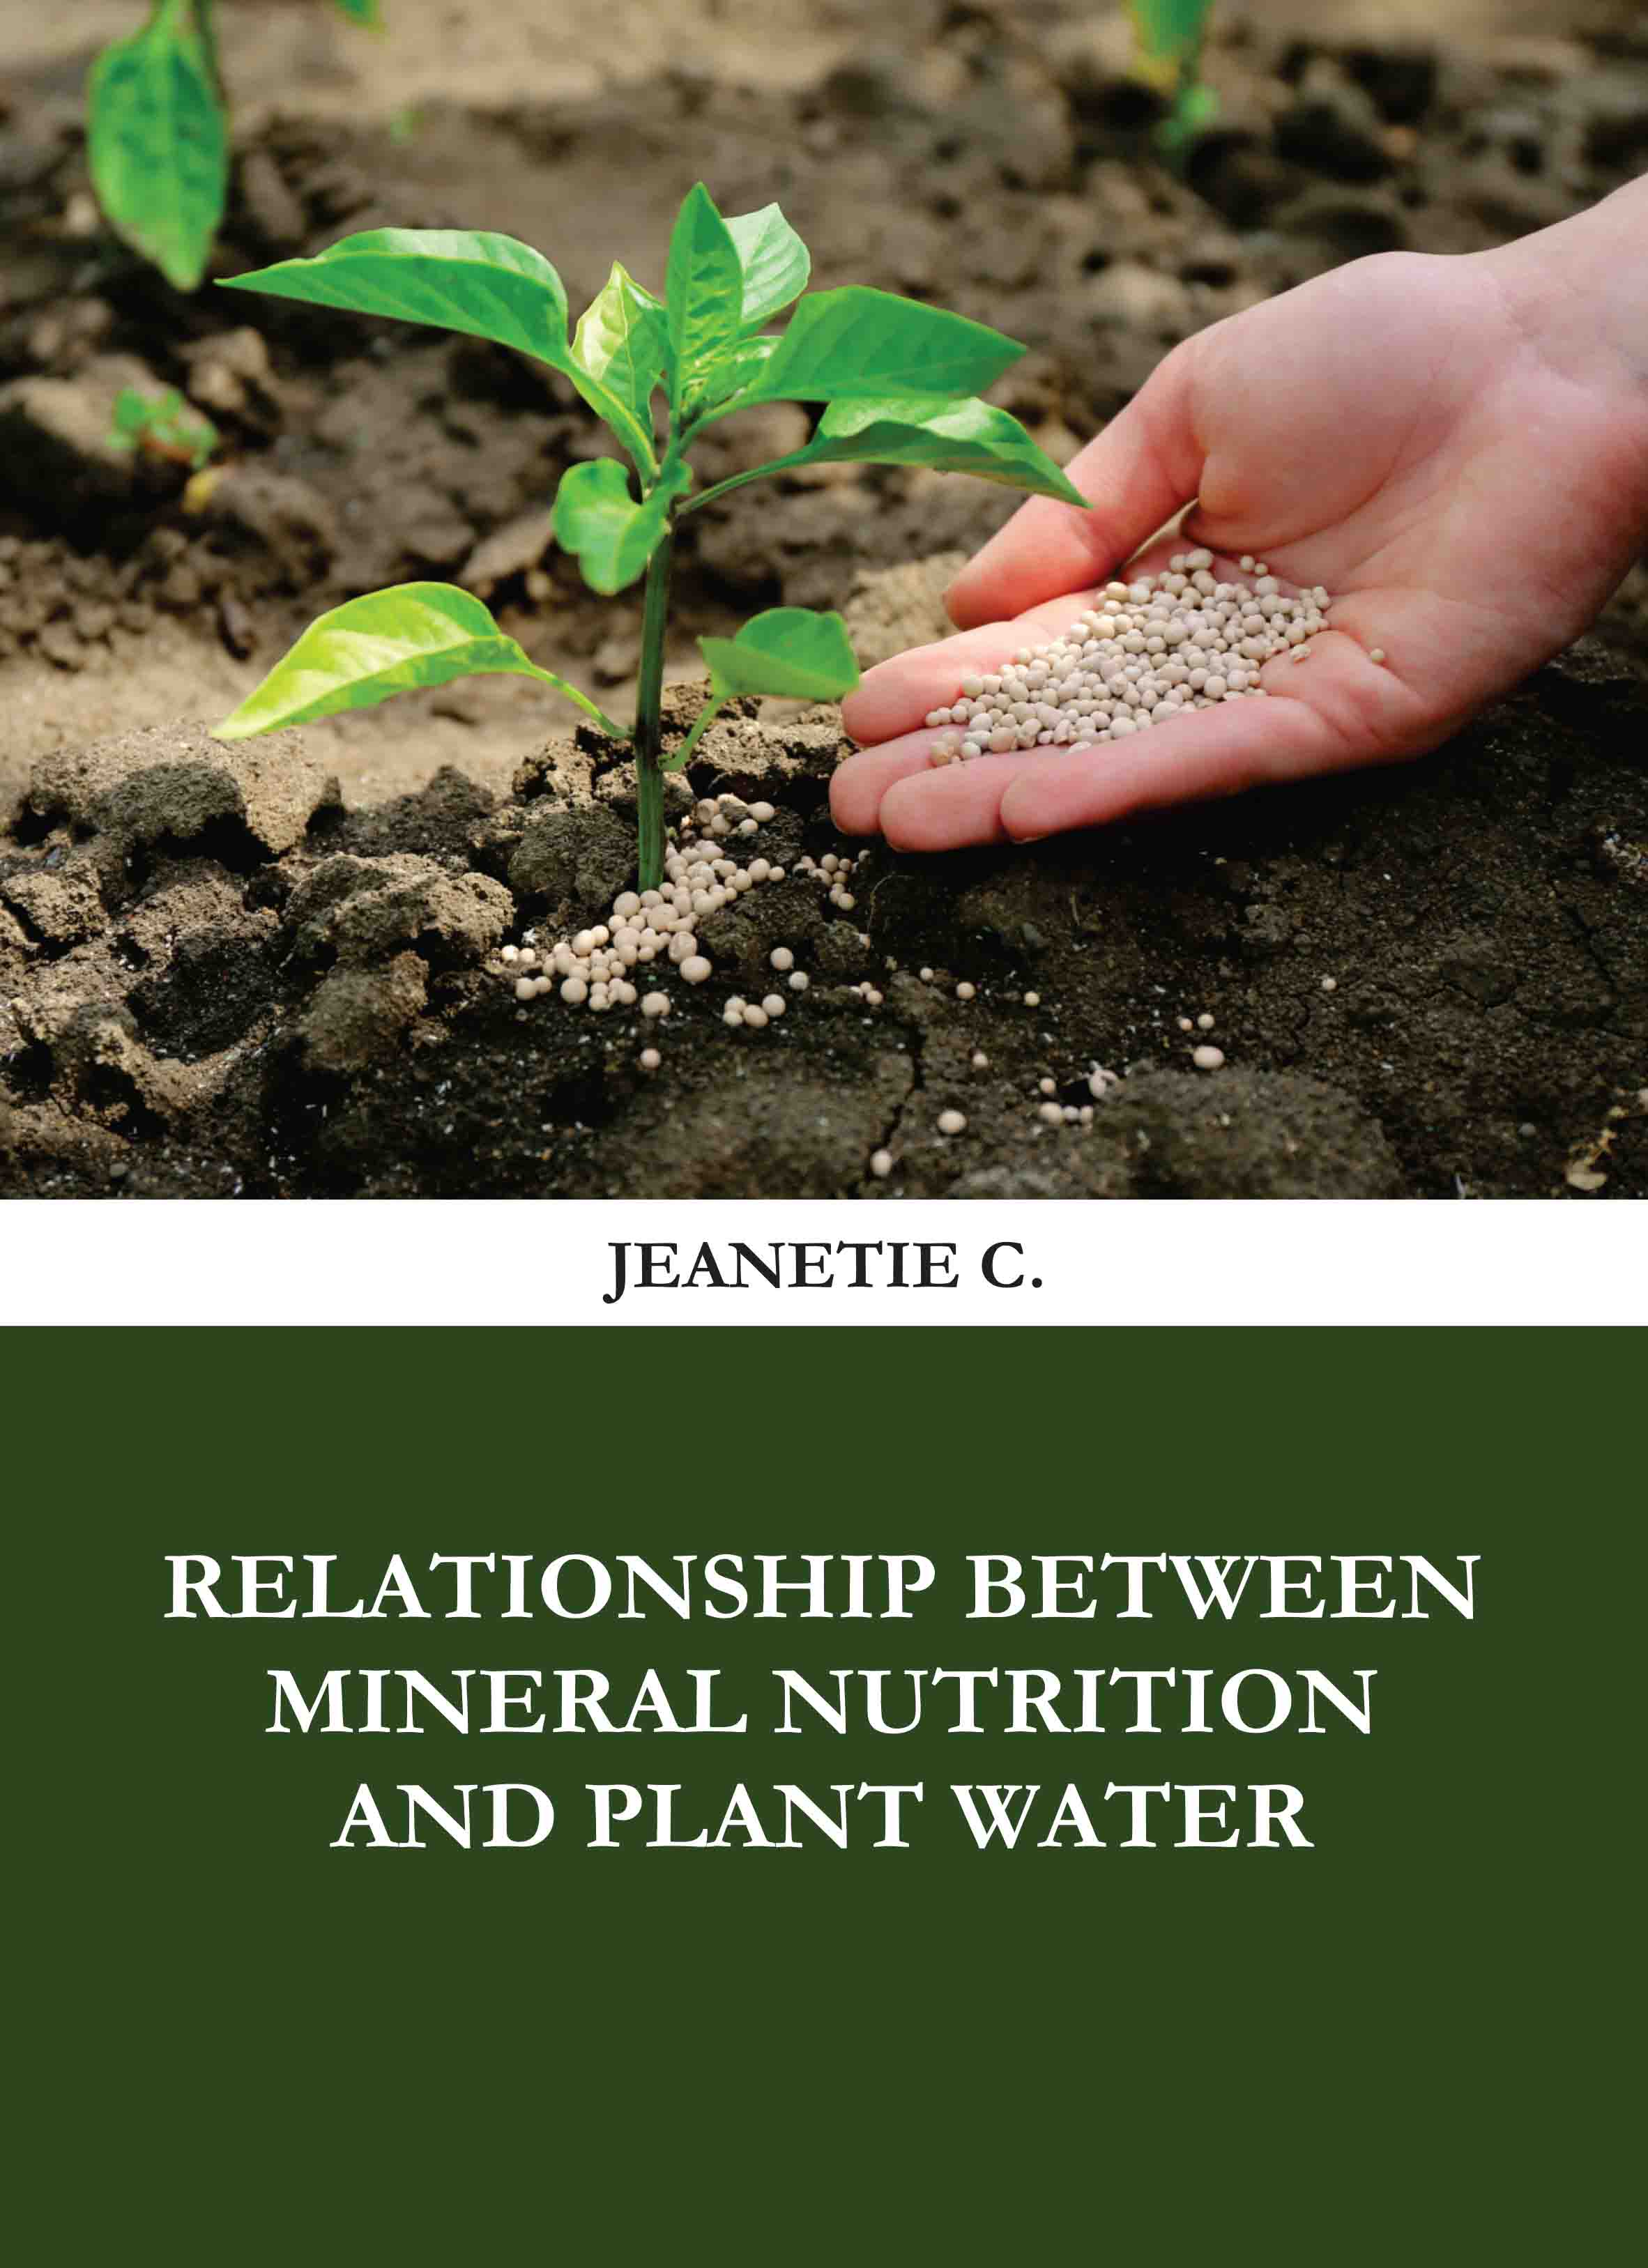 Relationship Between Mineral Nutrition and Plant Water